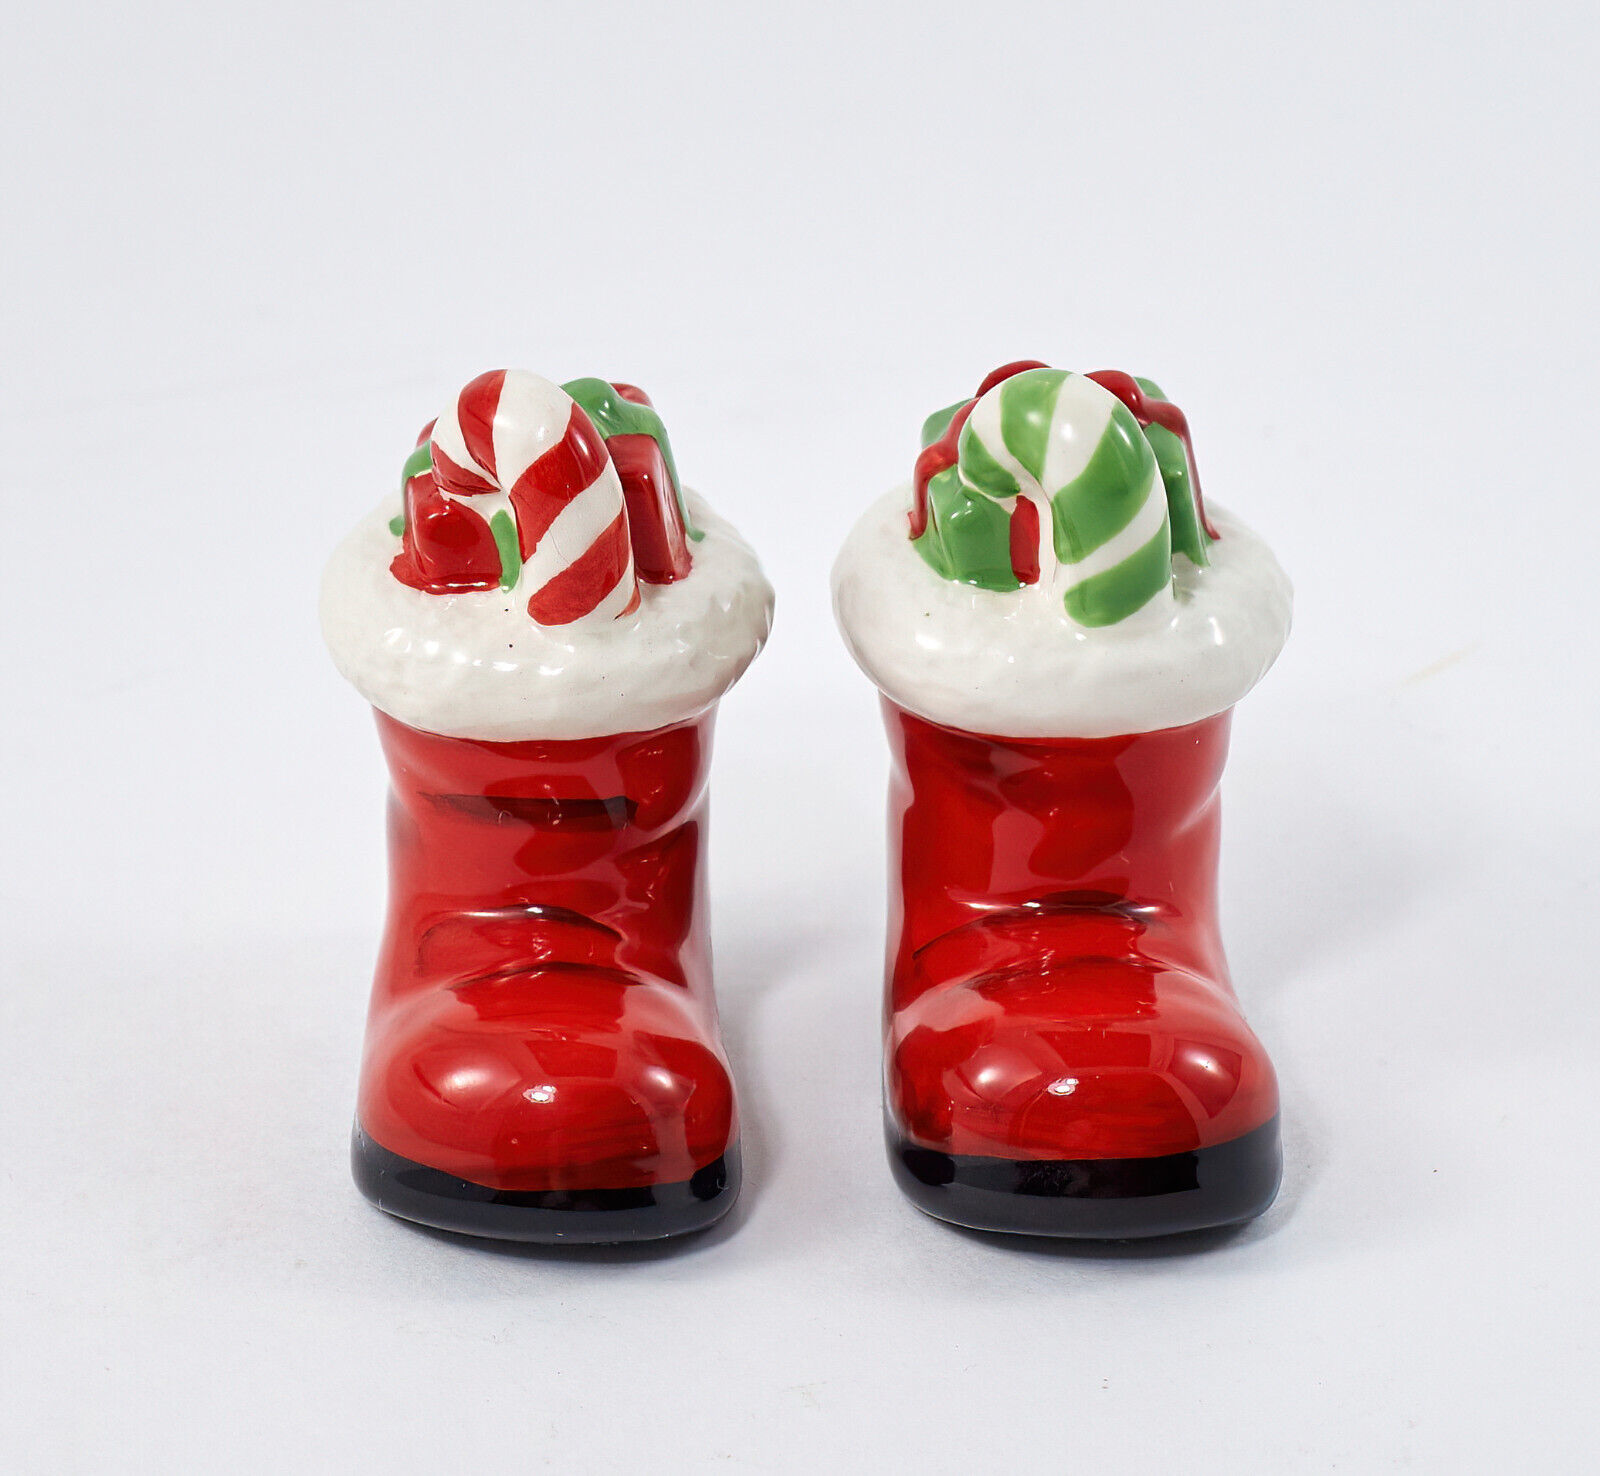 Christmas Salt & Pepper Shakers Miniature Santa Boots Candy Canes Gifts Hallmark - $14.99